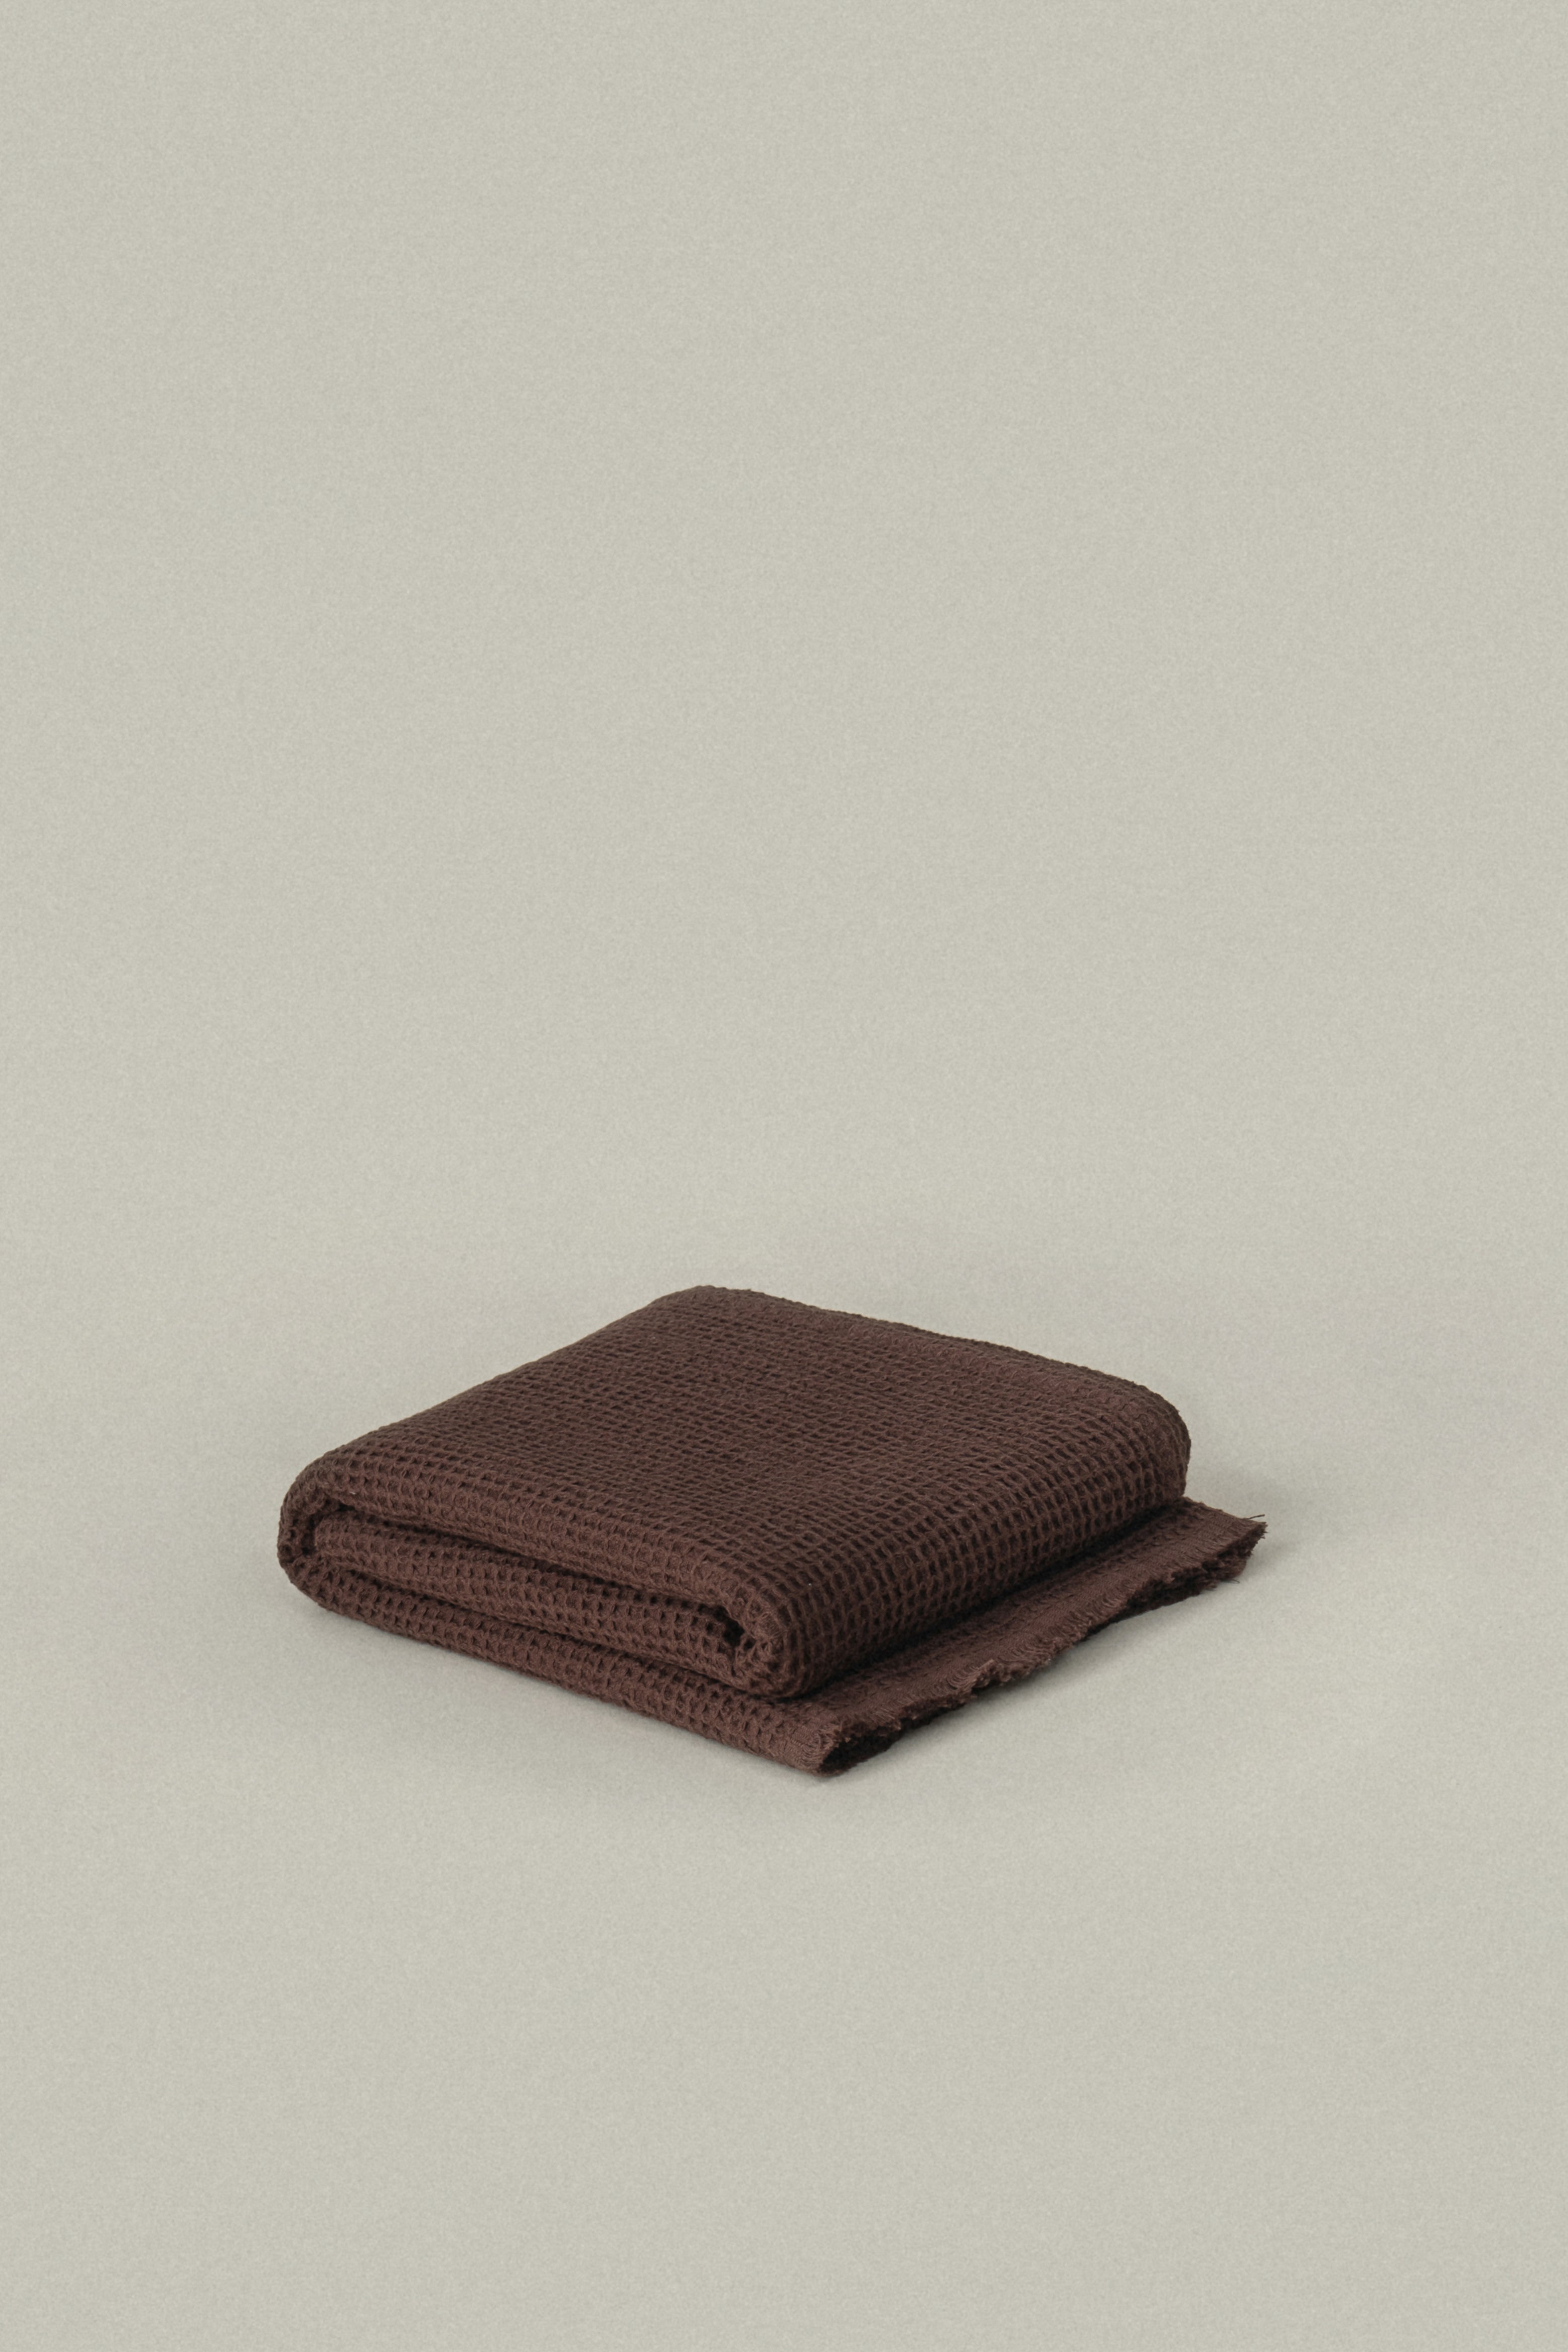 Umber Brown Everyday Waffle Towels - featured